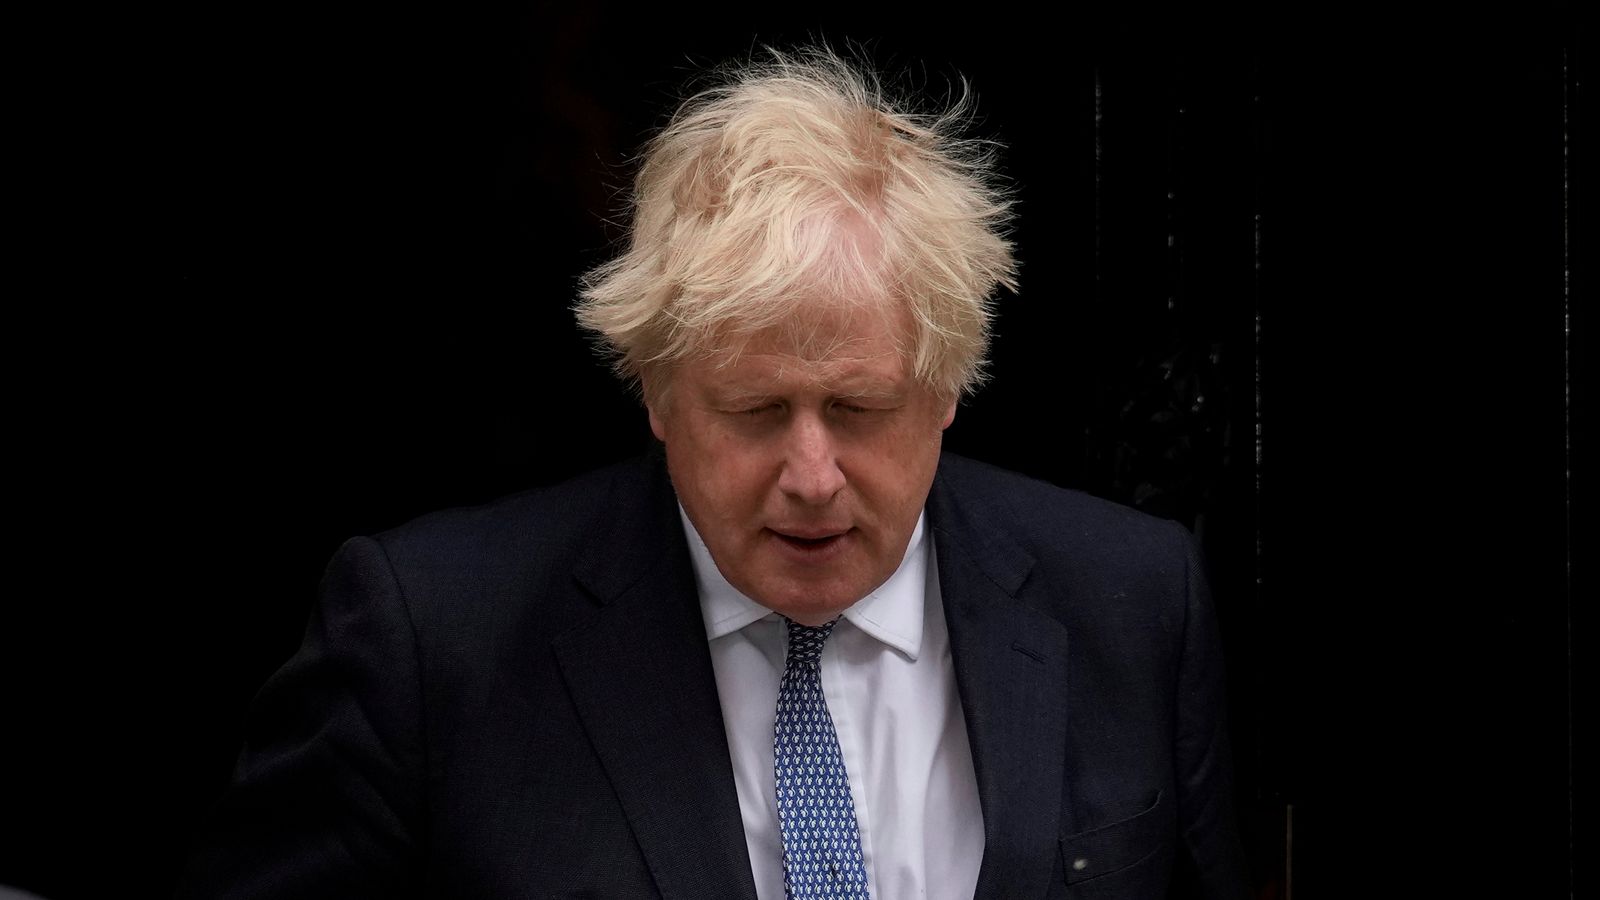 Boris Johnson: For now he stays in office, but is he really in power? | Politics News